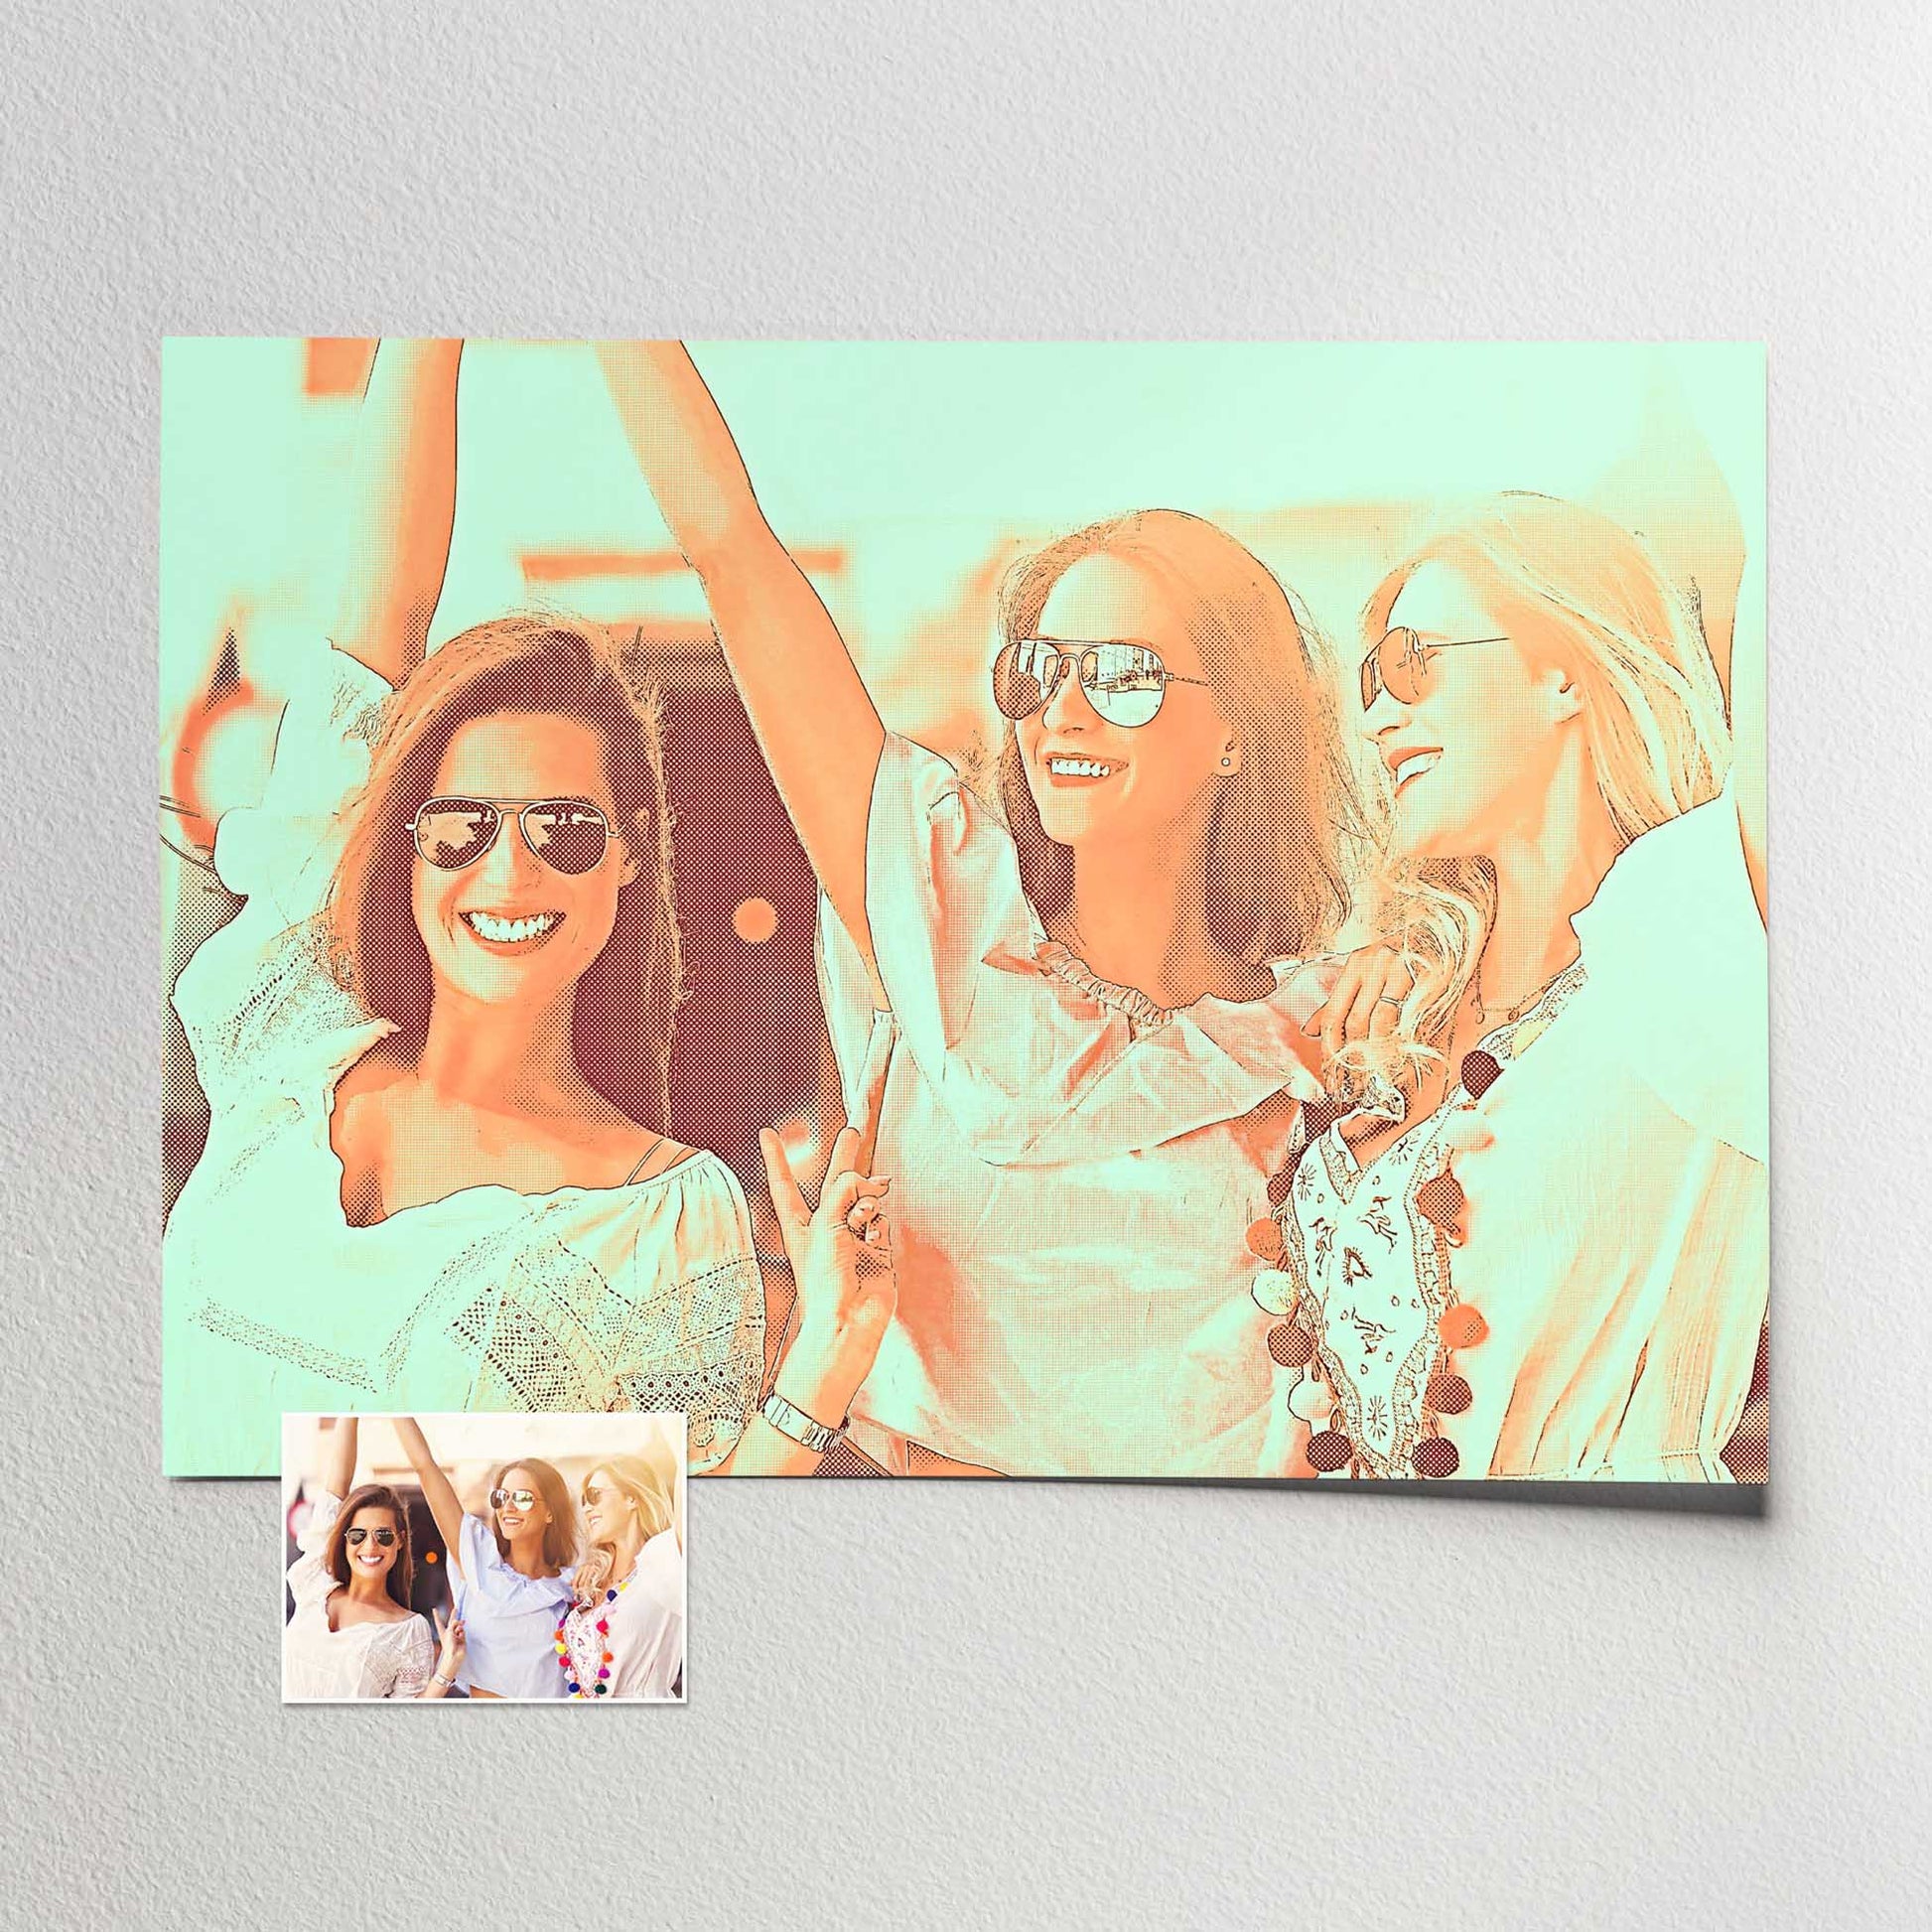 Step into a world of vibrant creativity with our Personalised Orange & Green Print. Cartoonized from your photo with a halftone effect, it exudes retro, old school charm. The energetic orange and green hues create a cool and trendy vibe